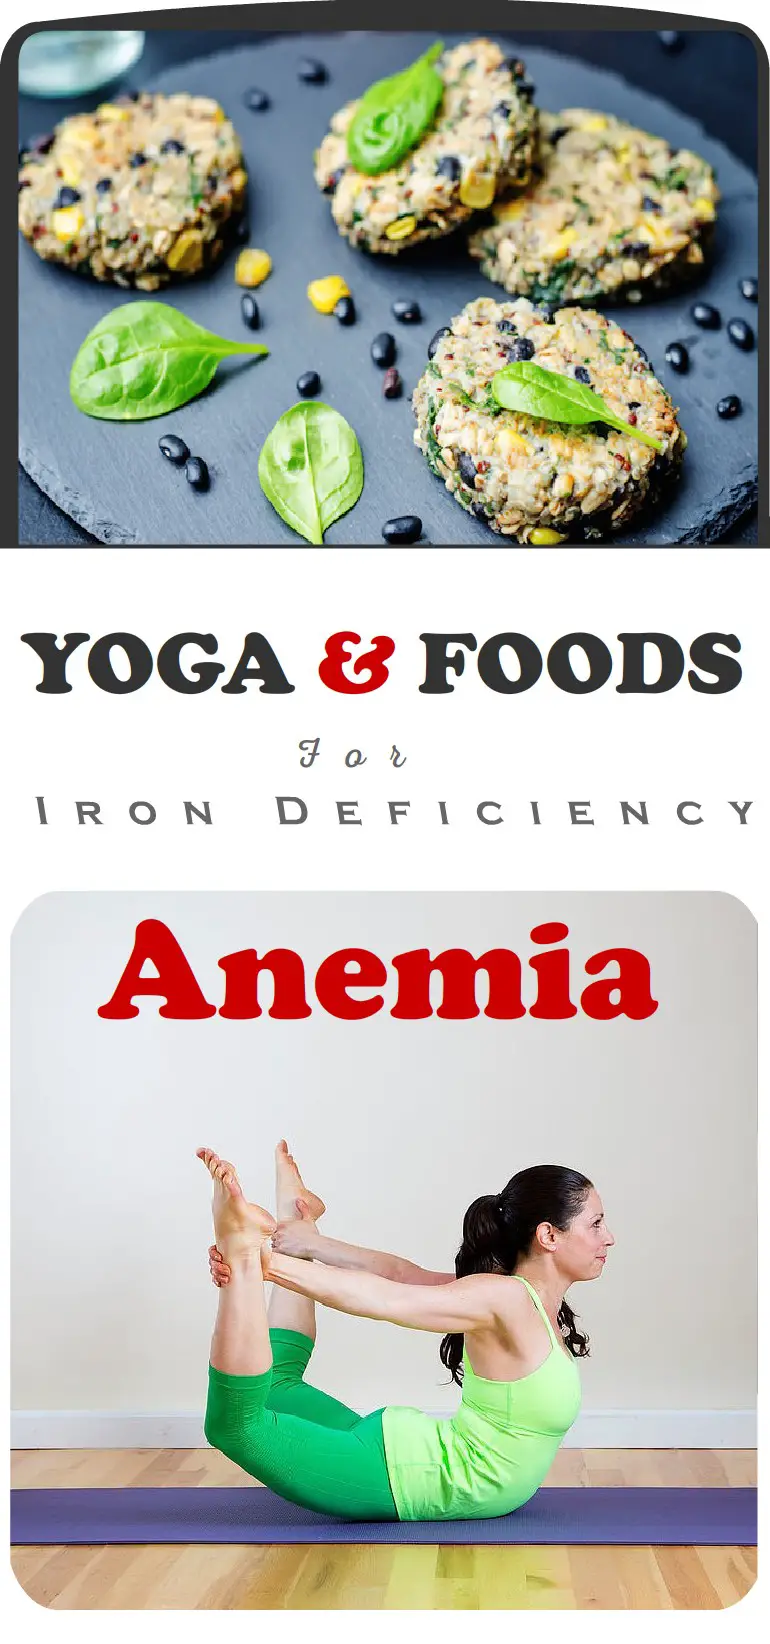 best foods and yoga home remedies for anemia iron deficiency